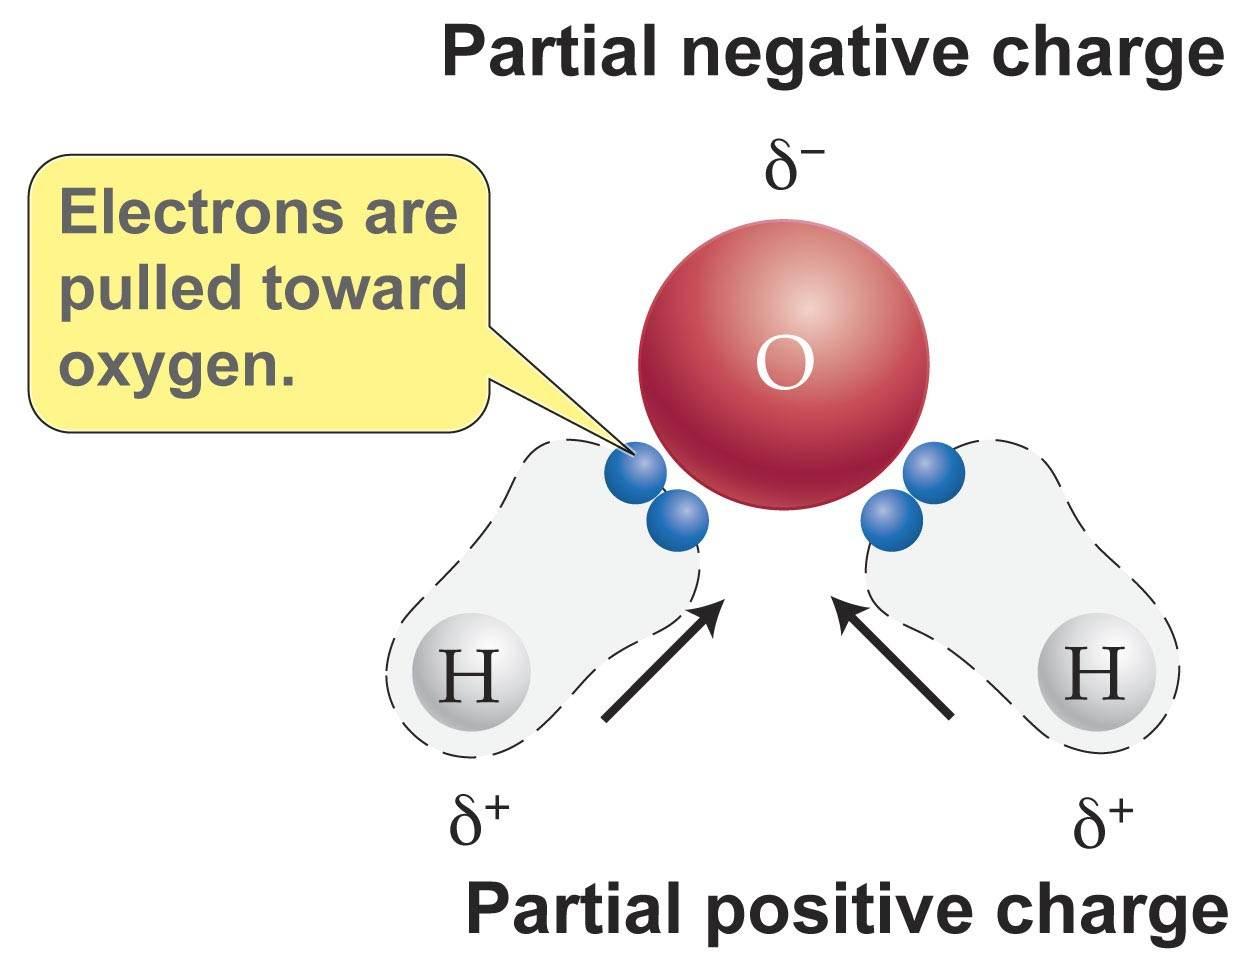 What causes polarity in water molecules